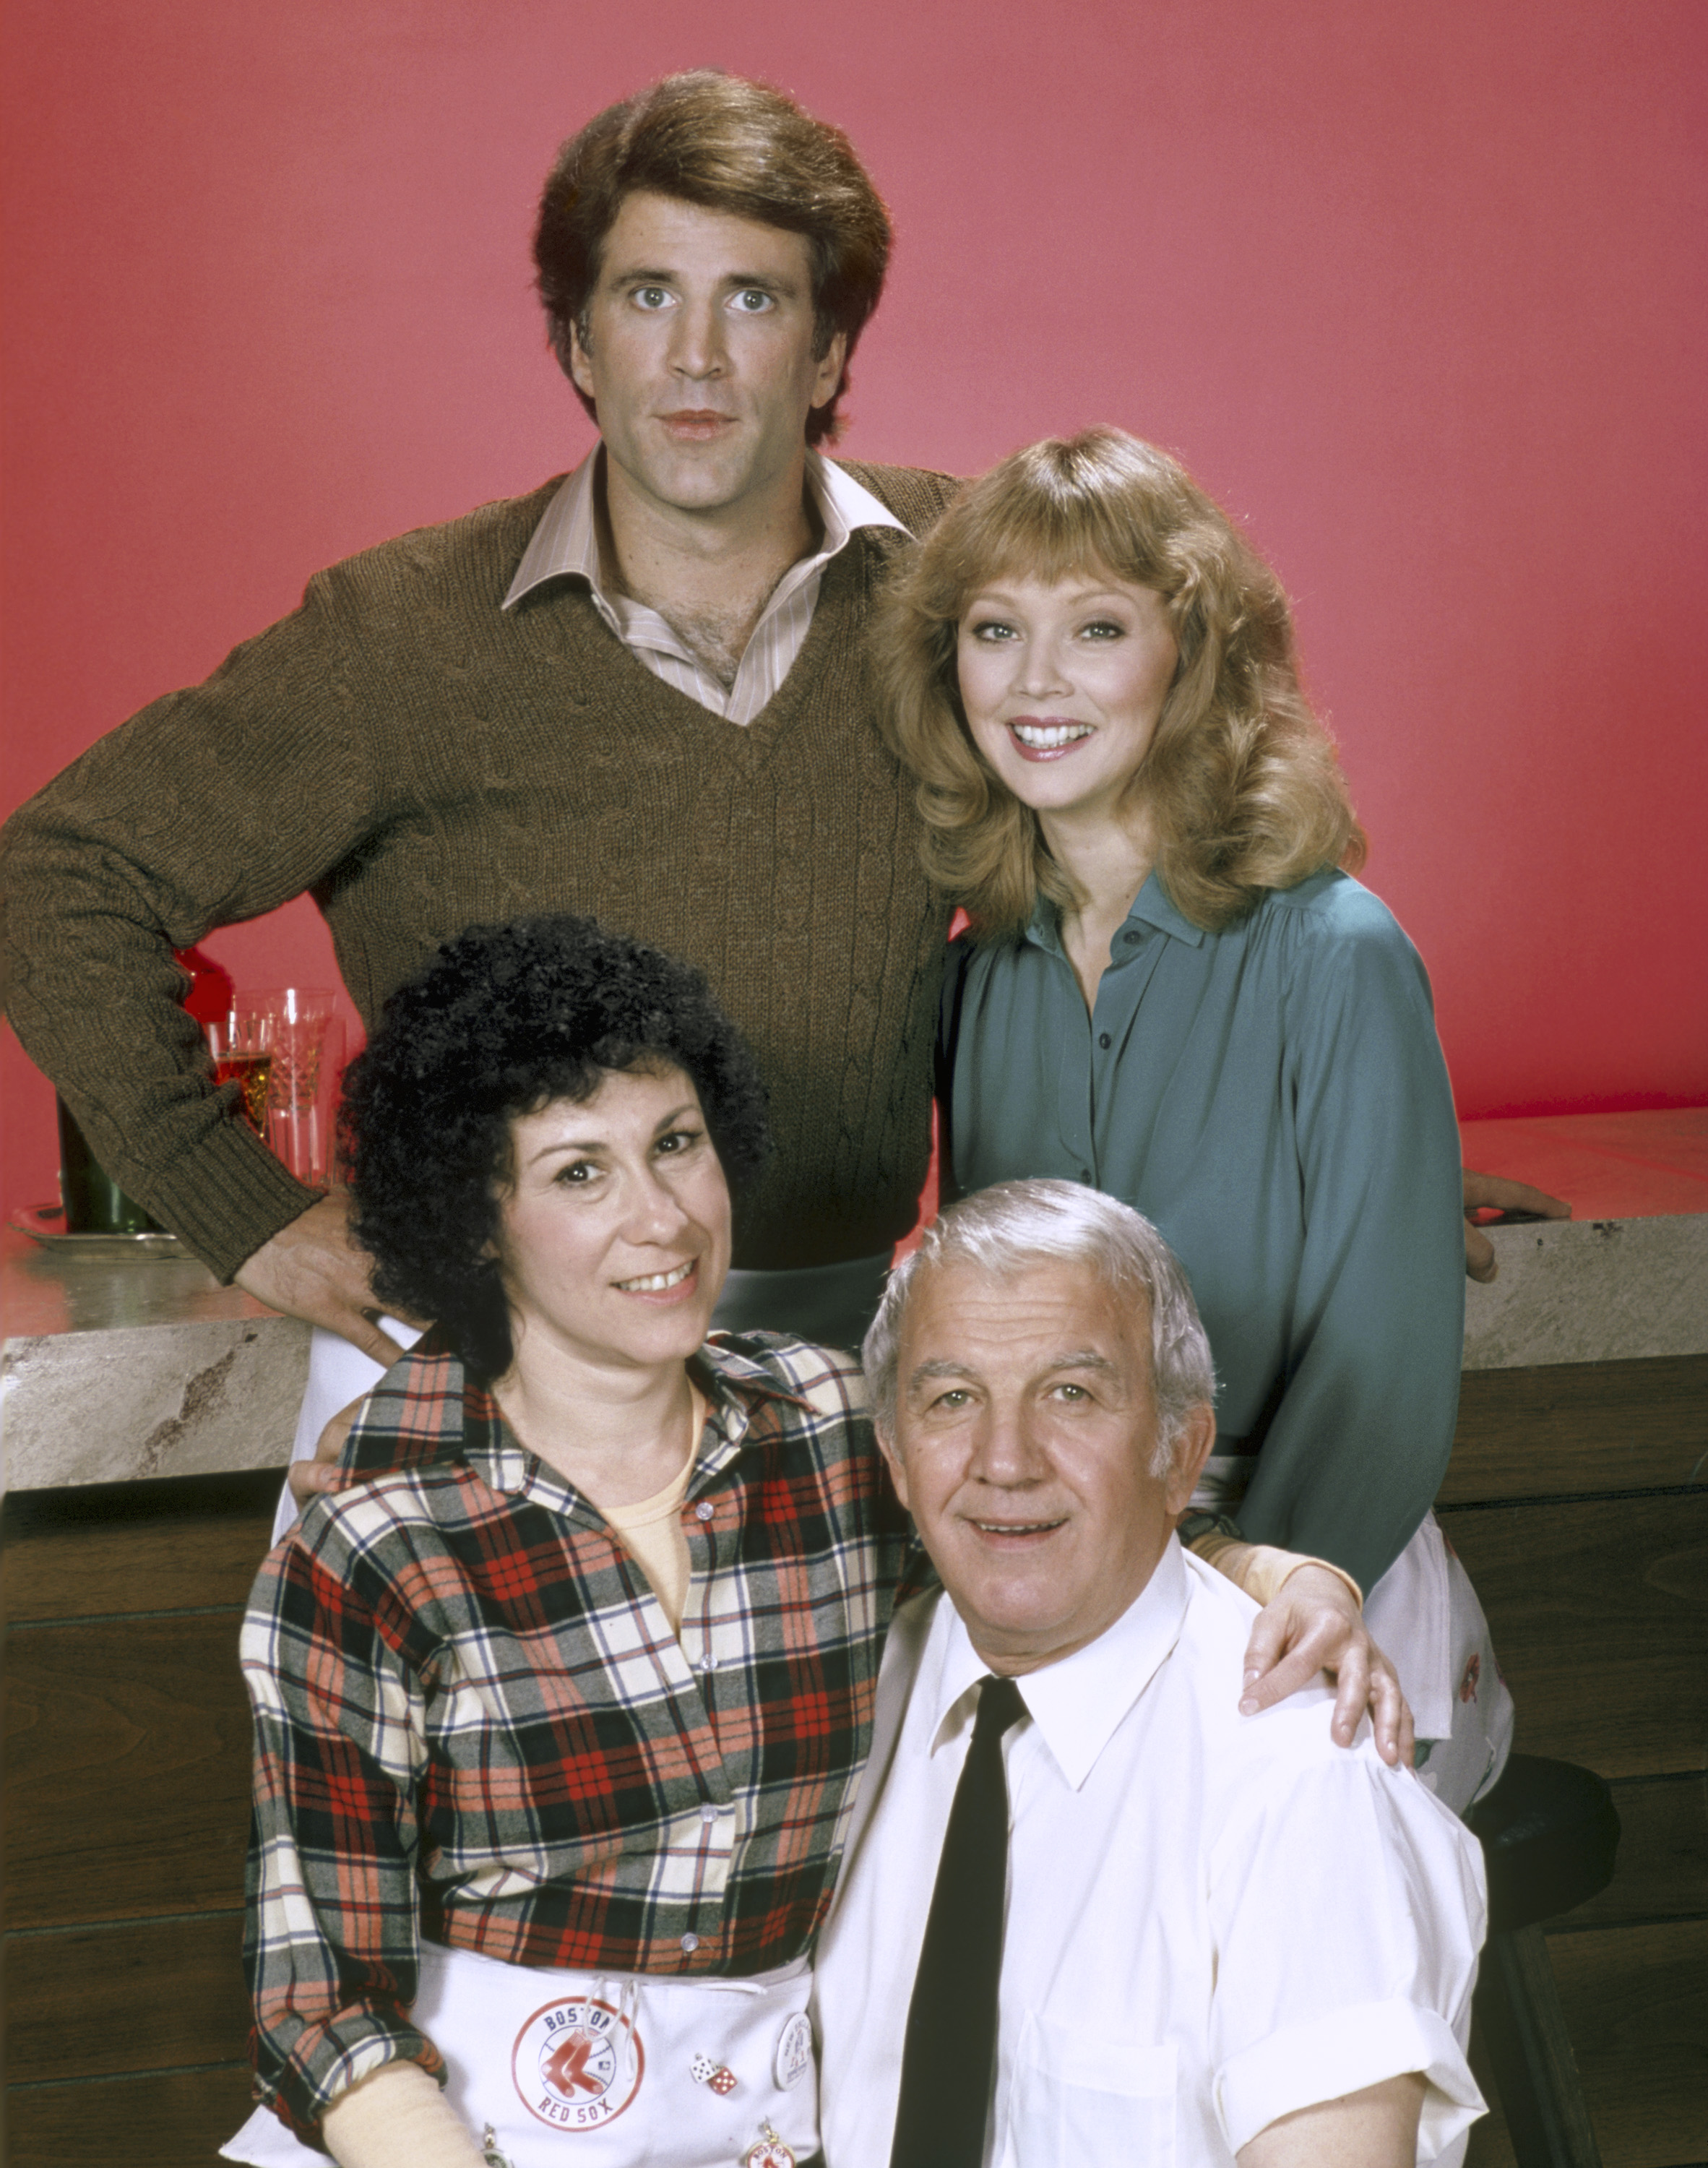 The "Cheers" cast (Clockwise) Ted Danson as Sam Malone, Shelley Long as Diane Chambers, Nicholas Colasanto as Ernie "Coach" Pantusso, Rhea Perlman as Carla Tortelli in 1990 | Source: Getty Images